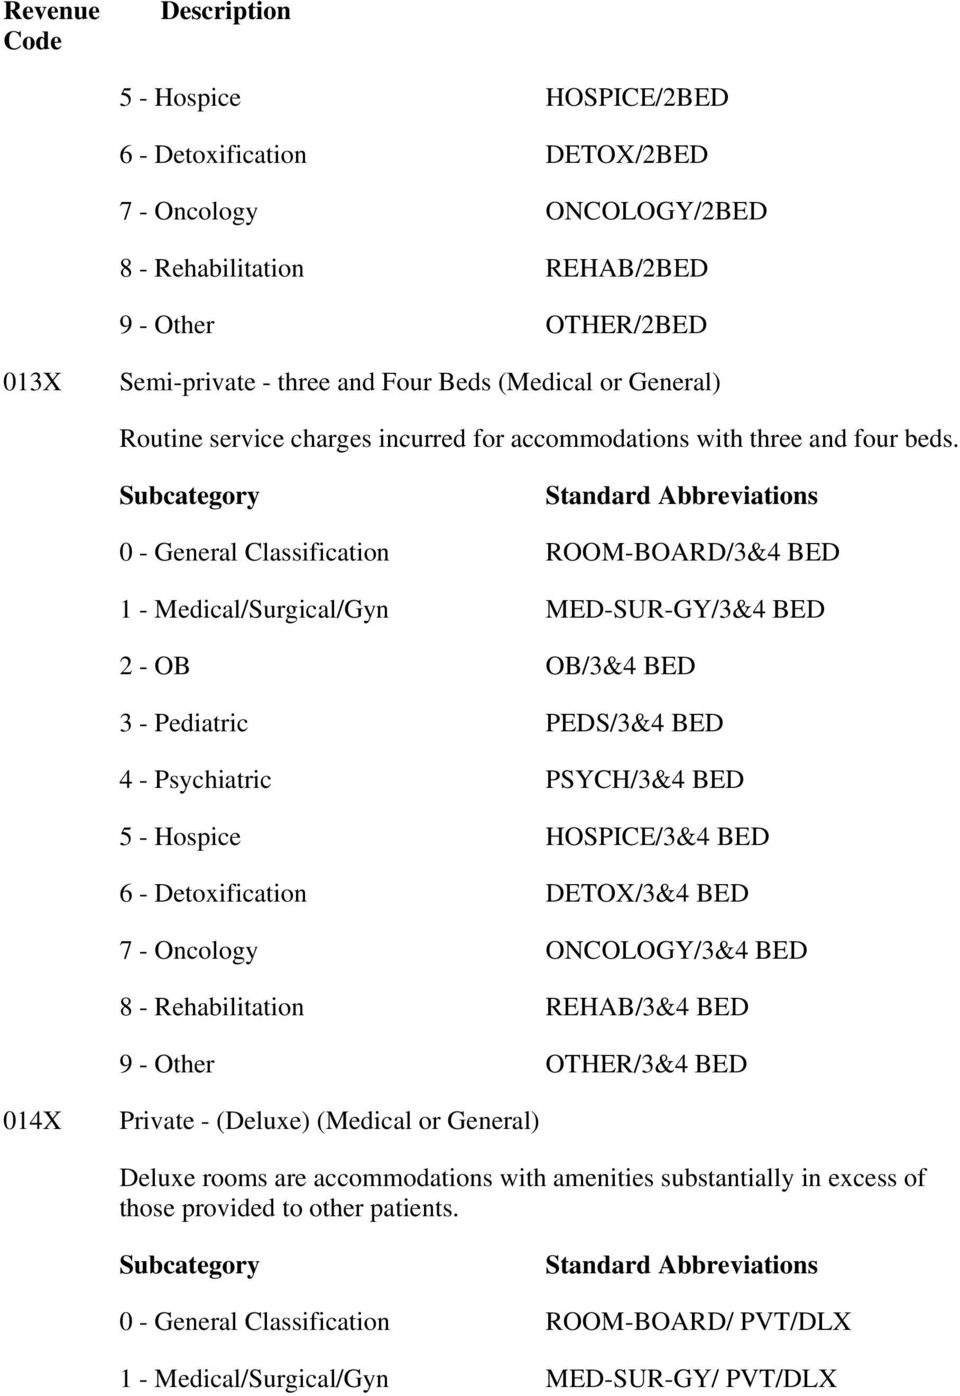 0 - General Classification ROOM-BOARD/3&4 BED 1 - Medical/Surgical/Gyn MED-SUR-GY/3&4 BED 2 - OB OB/3&4 BED 3 - Pediatric PEDS/3&4 BED 4 - Psychiatric PSYCH/3&4 BED 5 - Hospice HOSPICE/3&4 BED 6 -